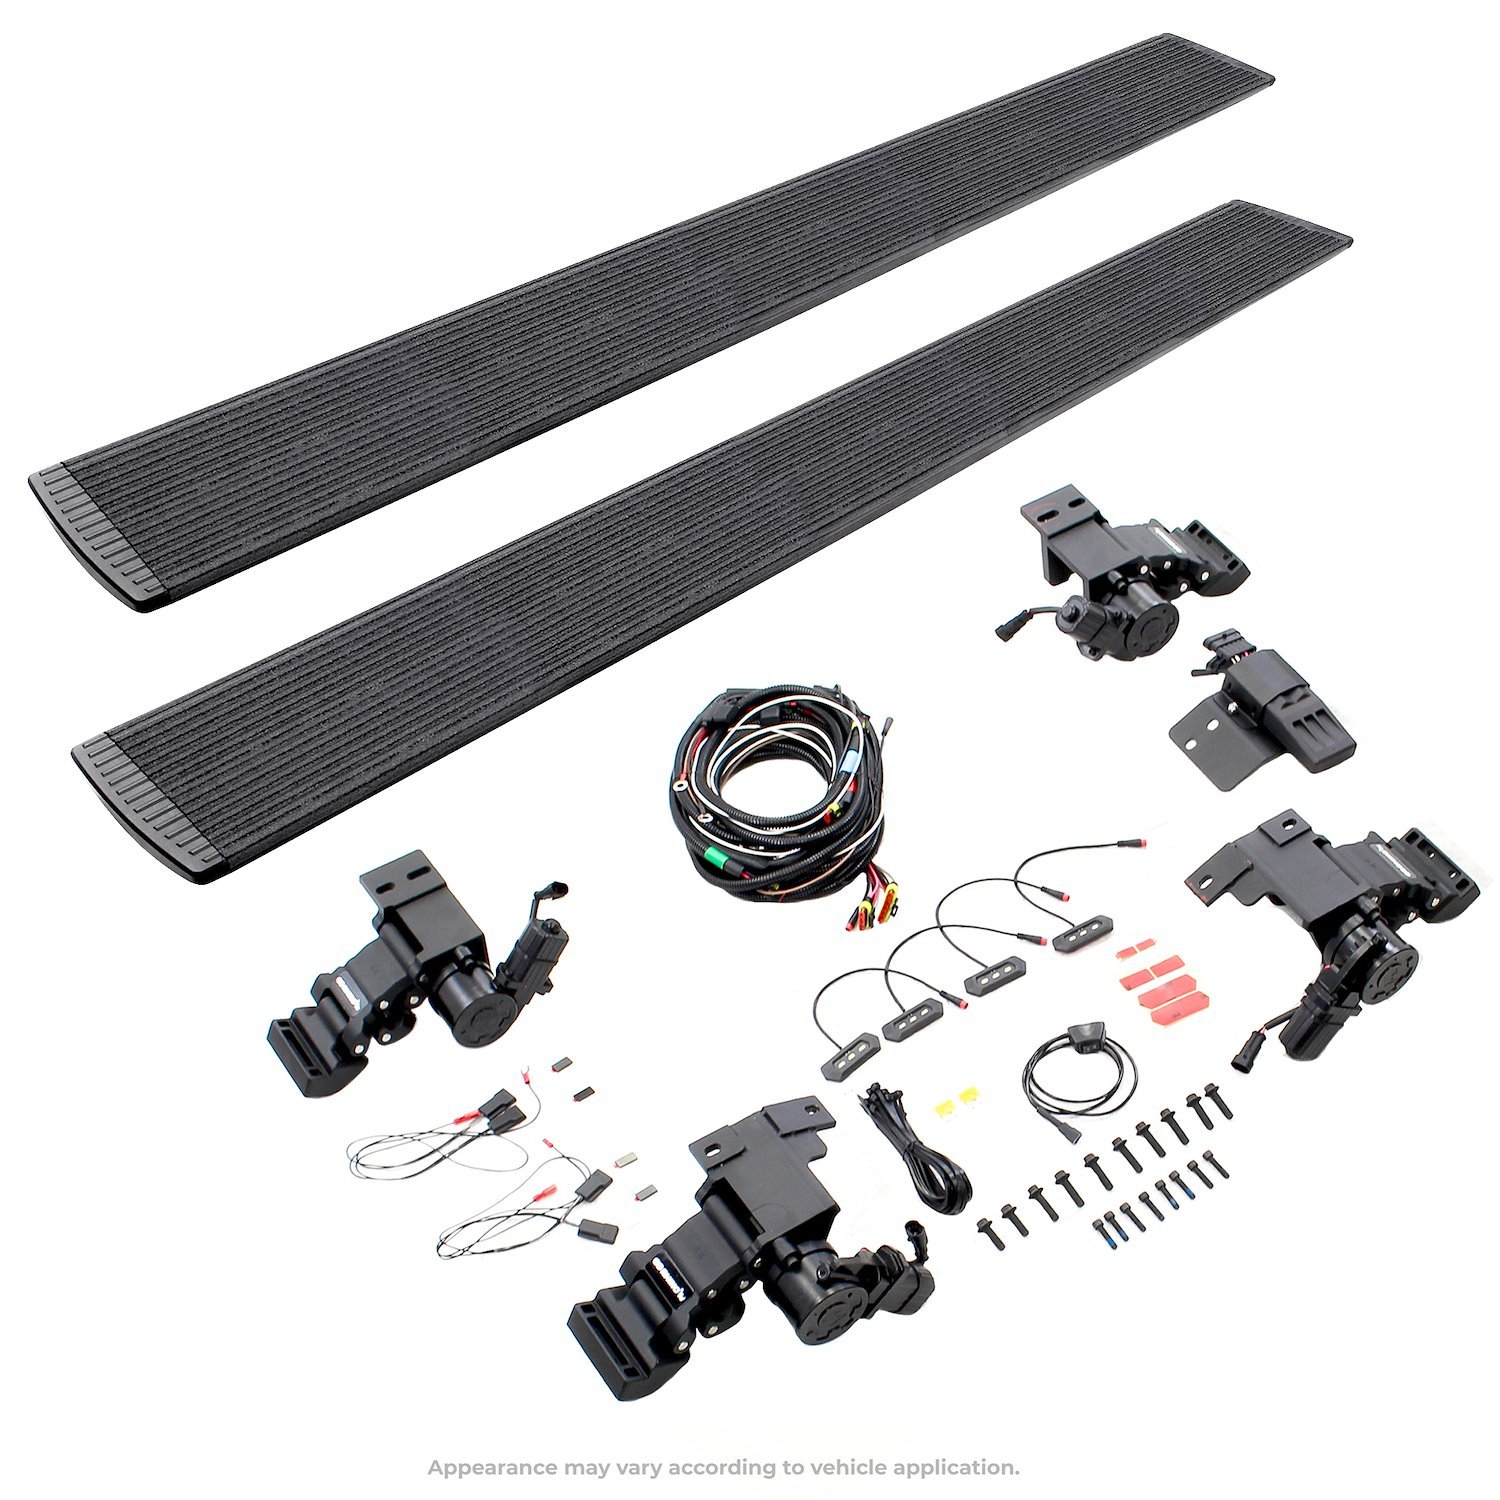 E1 Electric Running Board Kit Fits Select Ford Ranger Crew Cab Pickup - Gasoline & Diesel